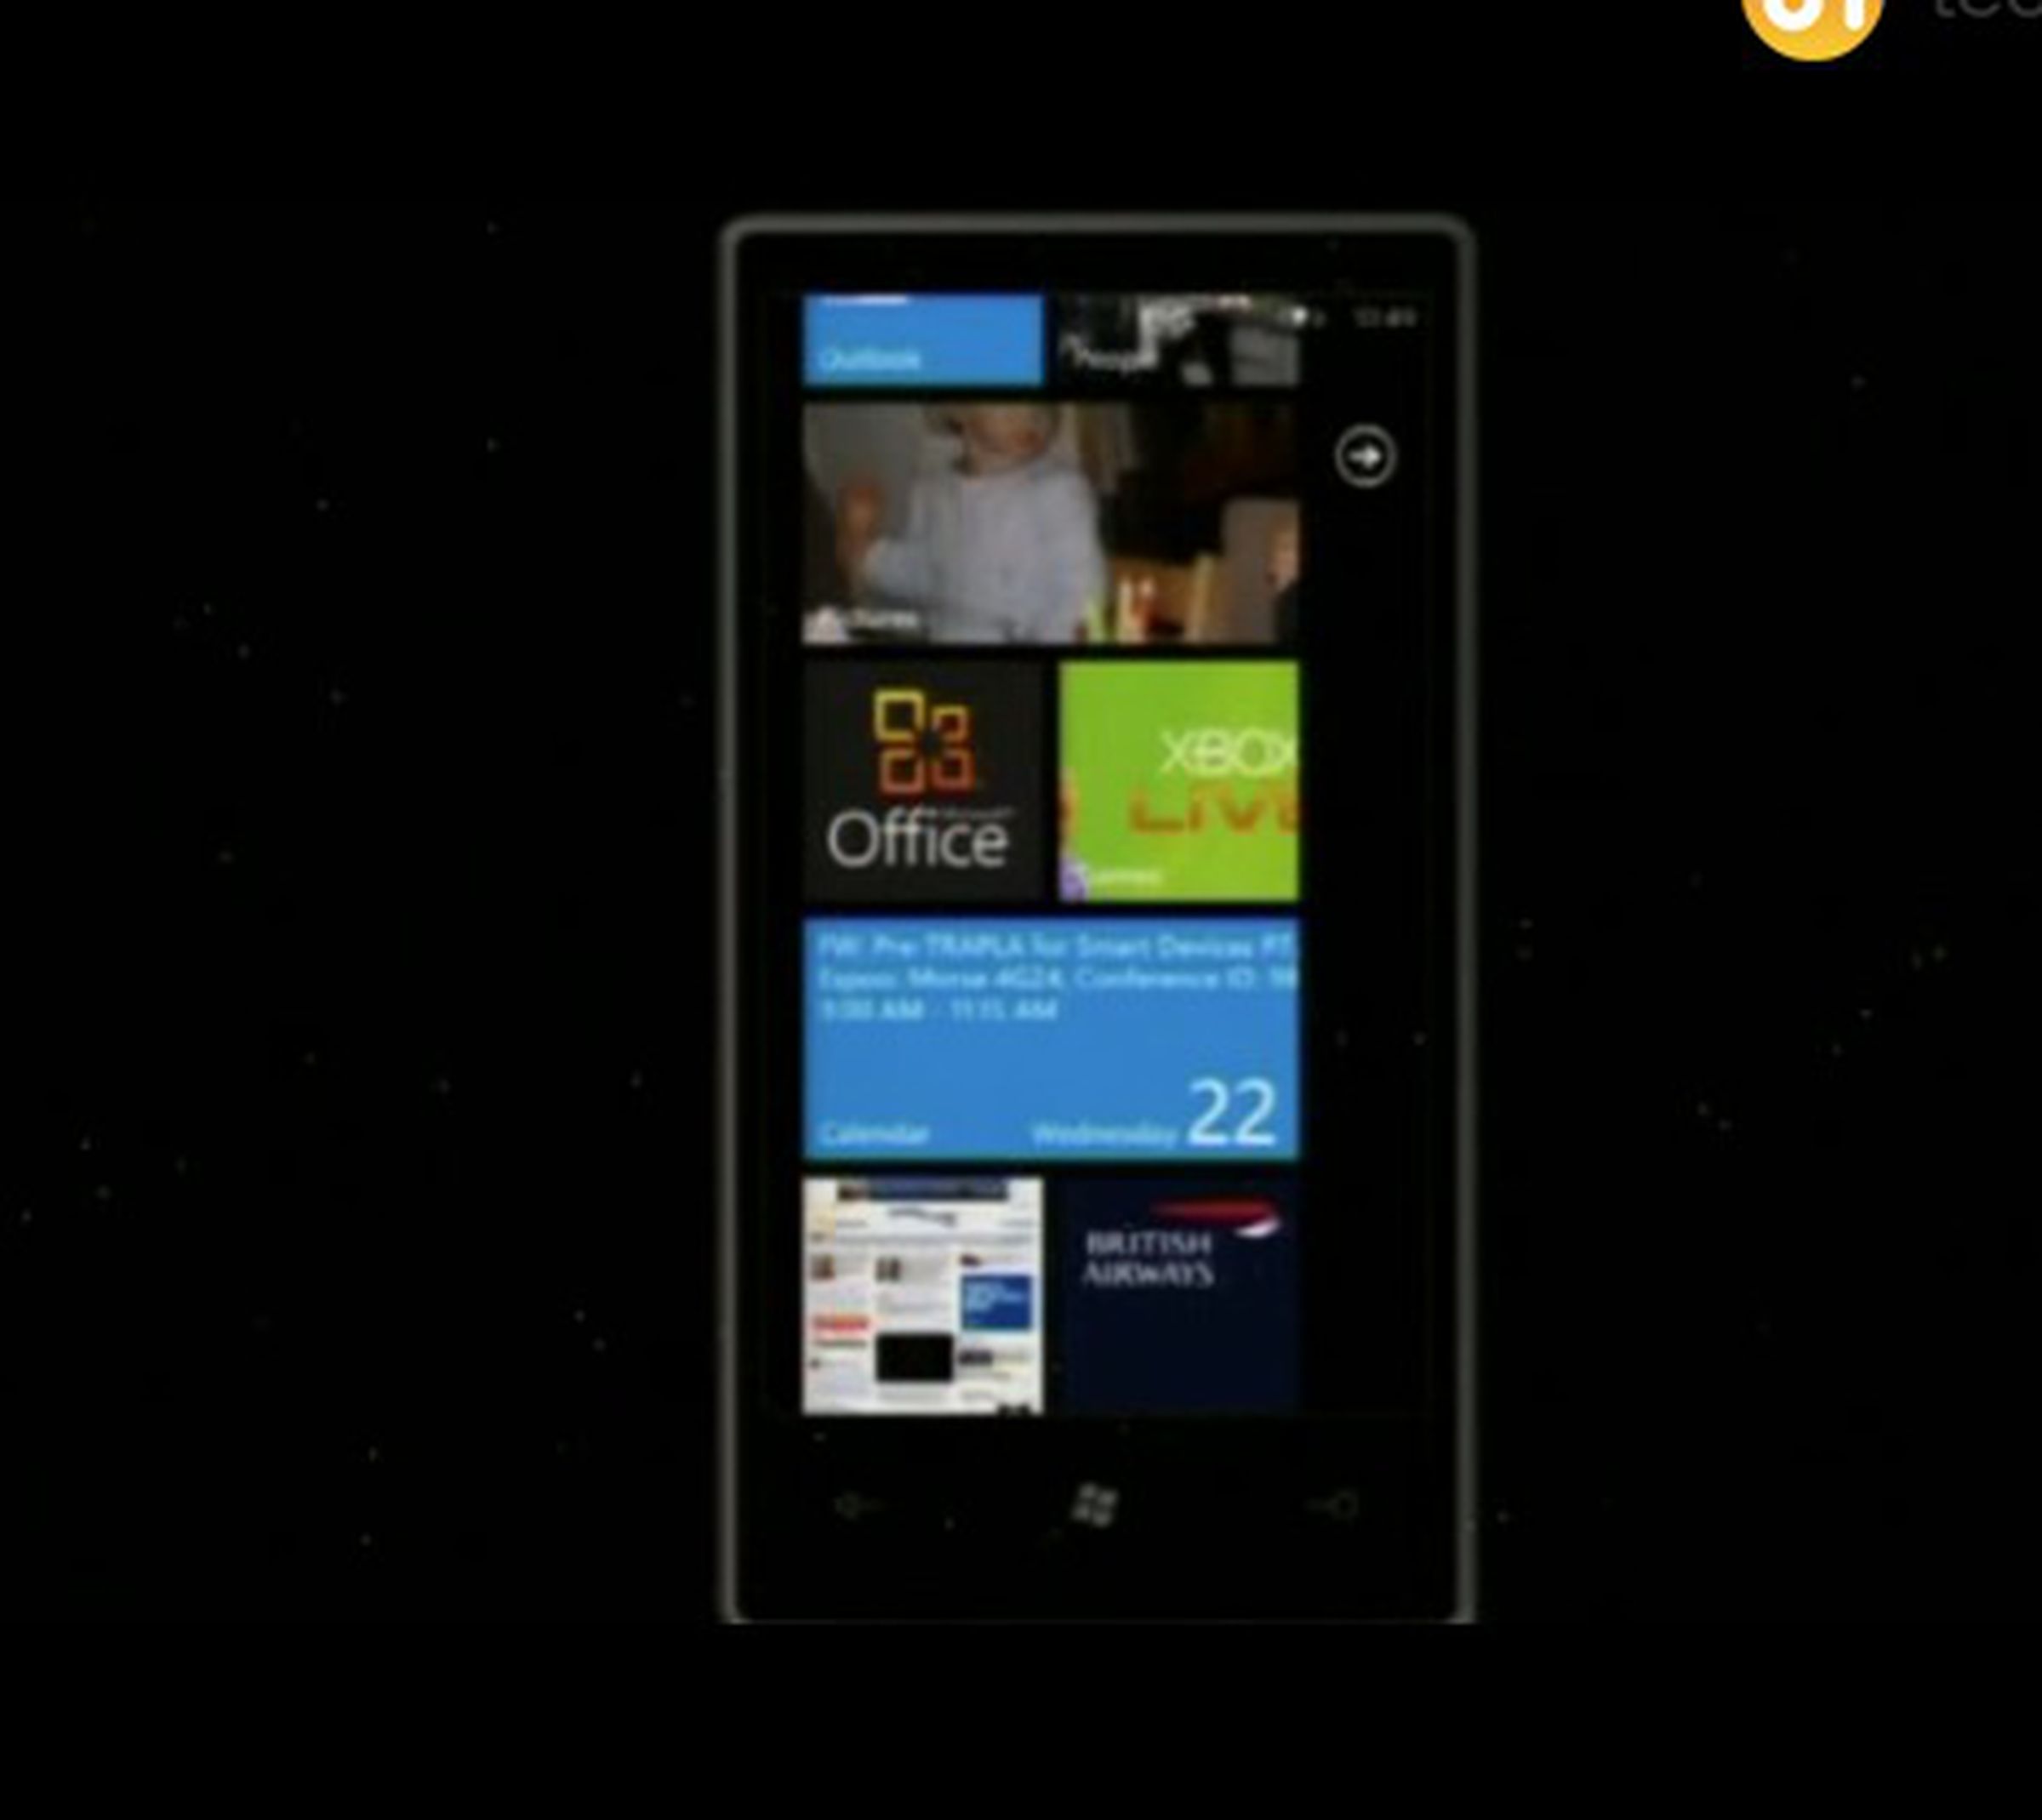 Nokia’s Elop unveils ‘Sea Ray,’ its first Windows Phone — shh, don’t tell anyone